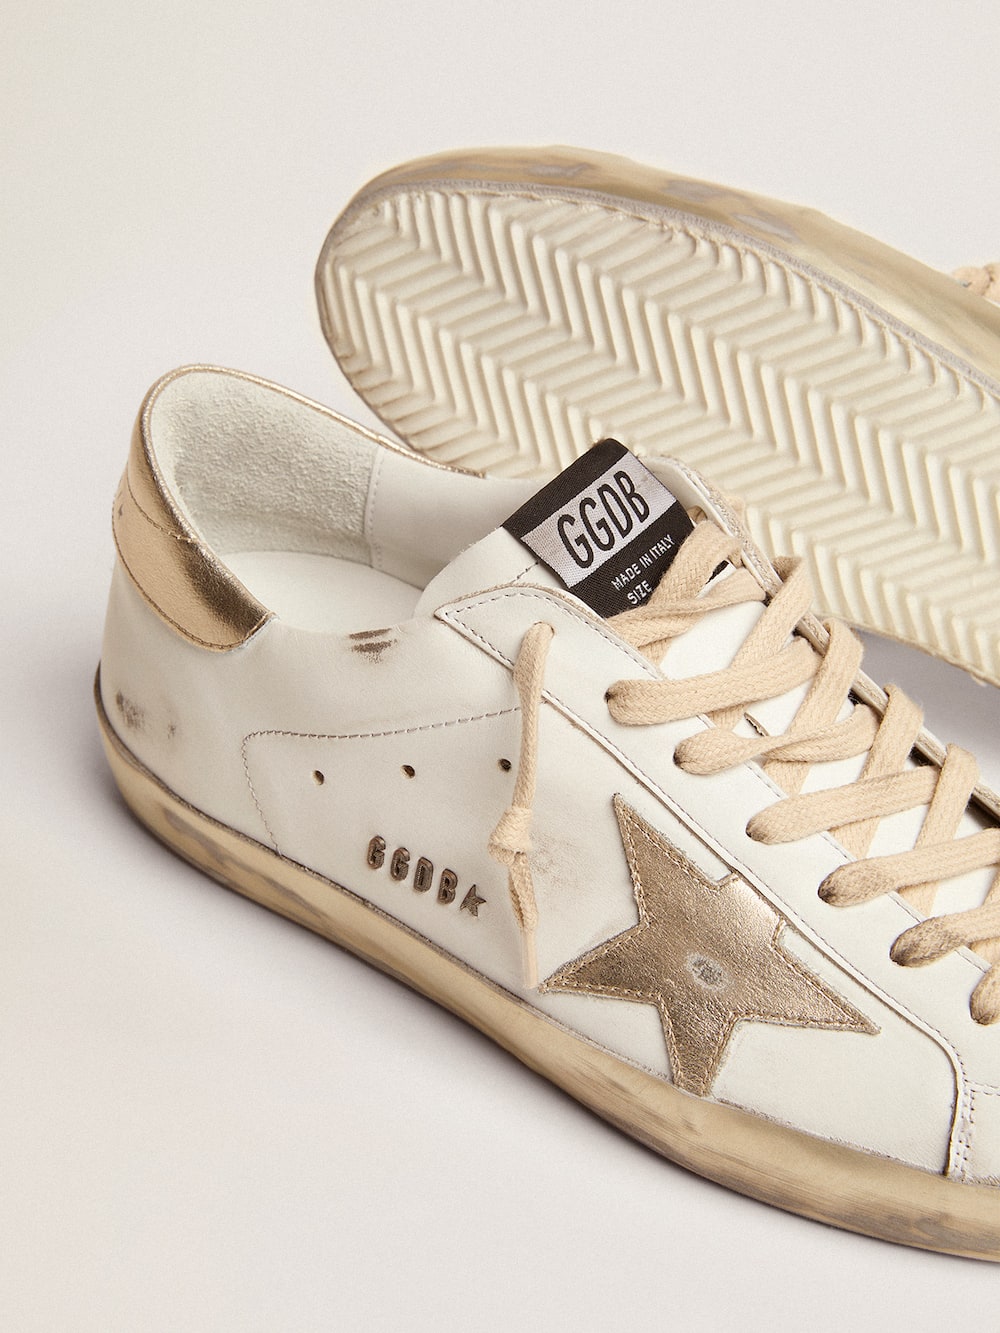 Golden Goose - Men's Super-Star with gold sparkle foxing and lettering in 